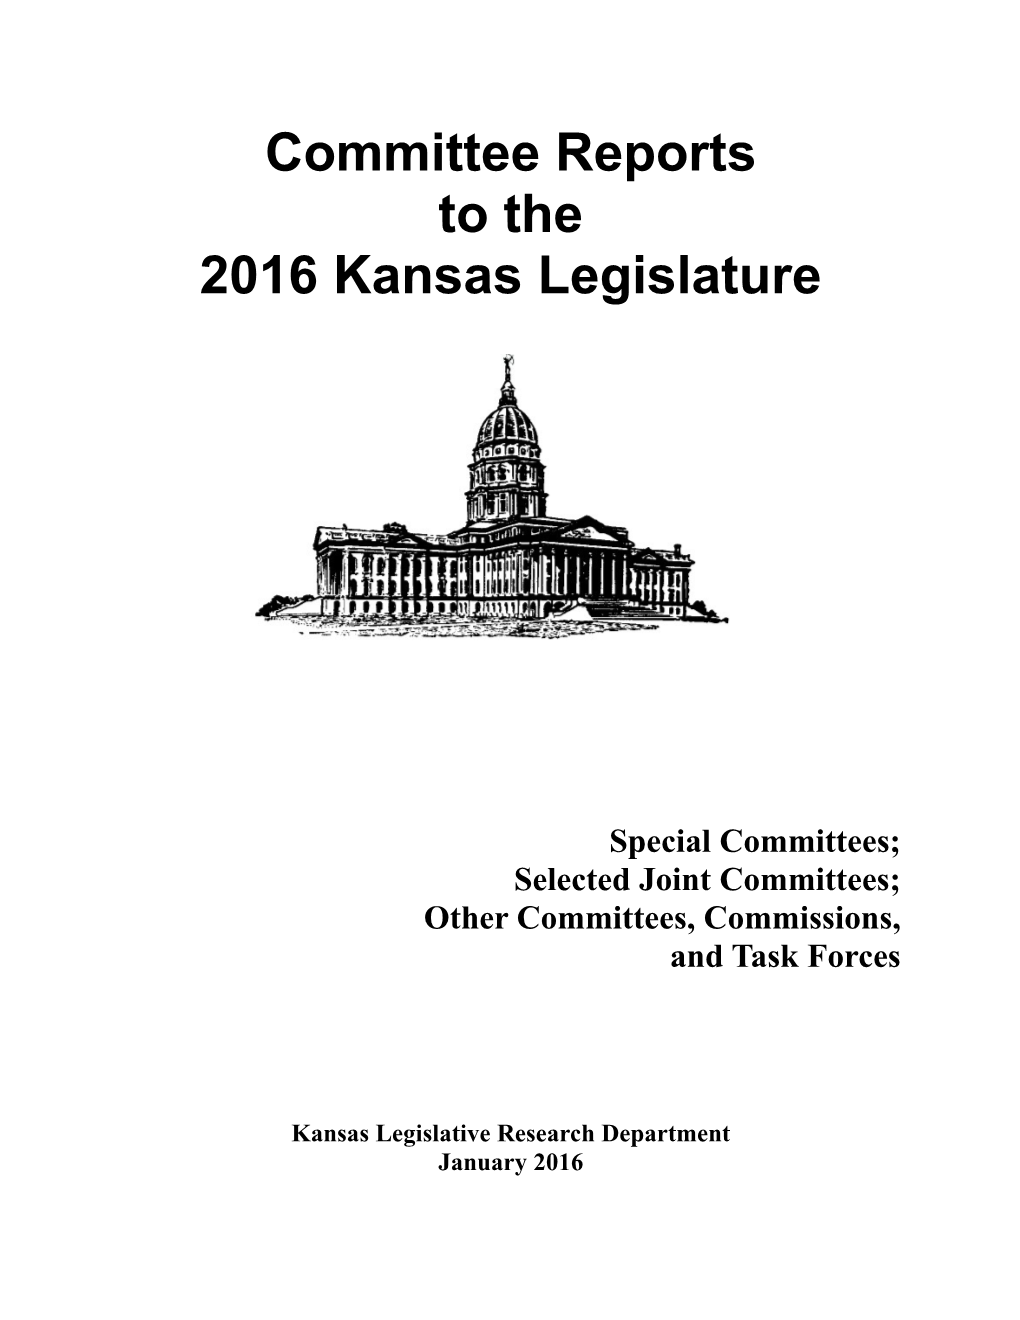 Committee Reports to the 2016 Legislature